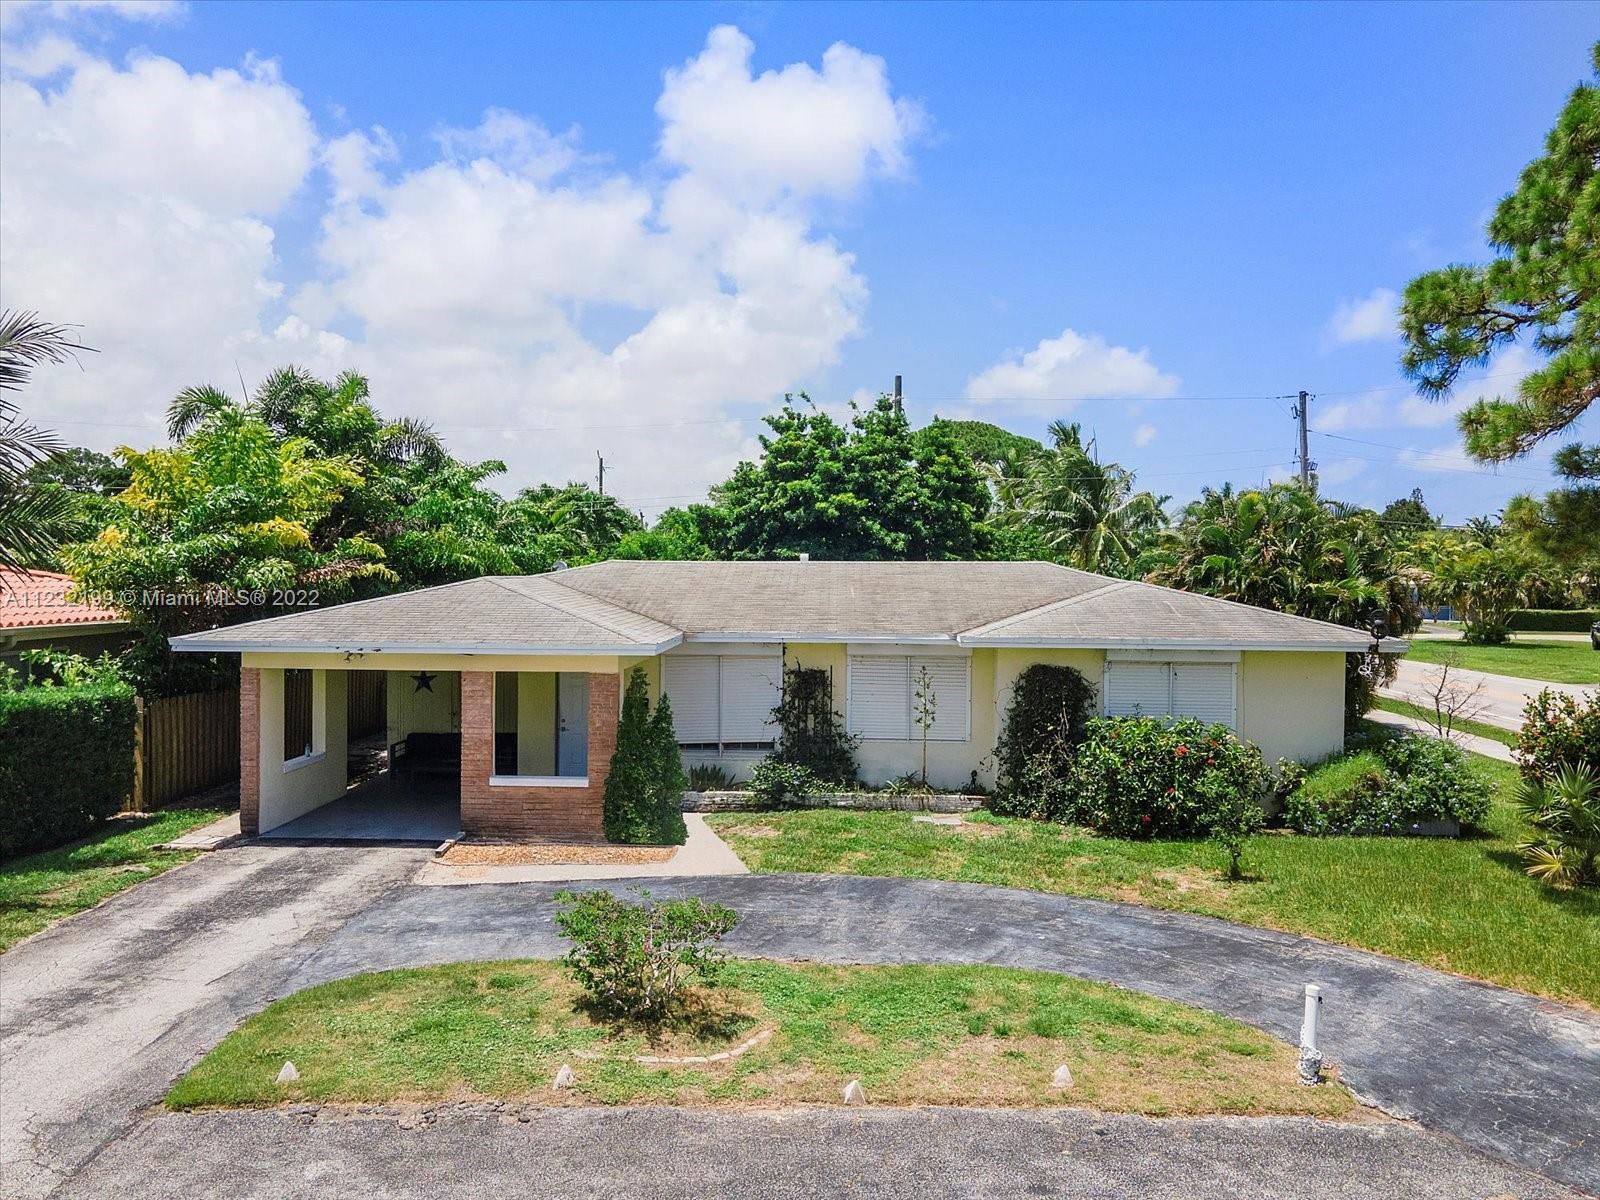 This corner lot home located in desirable Wilton Manors is ready for your imagination! Mid-century s